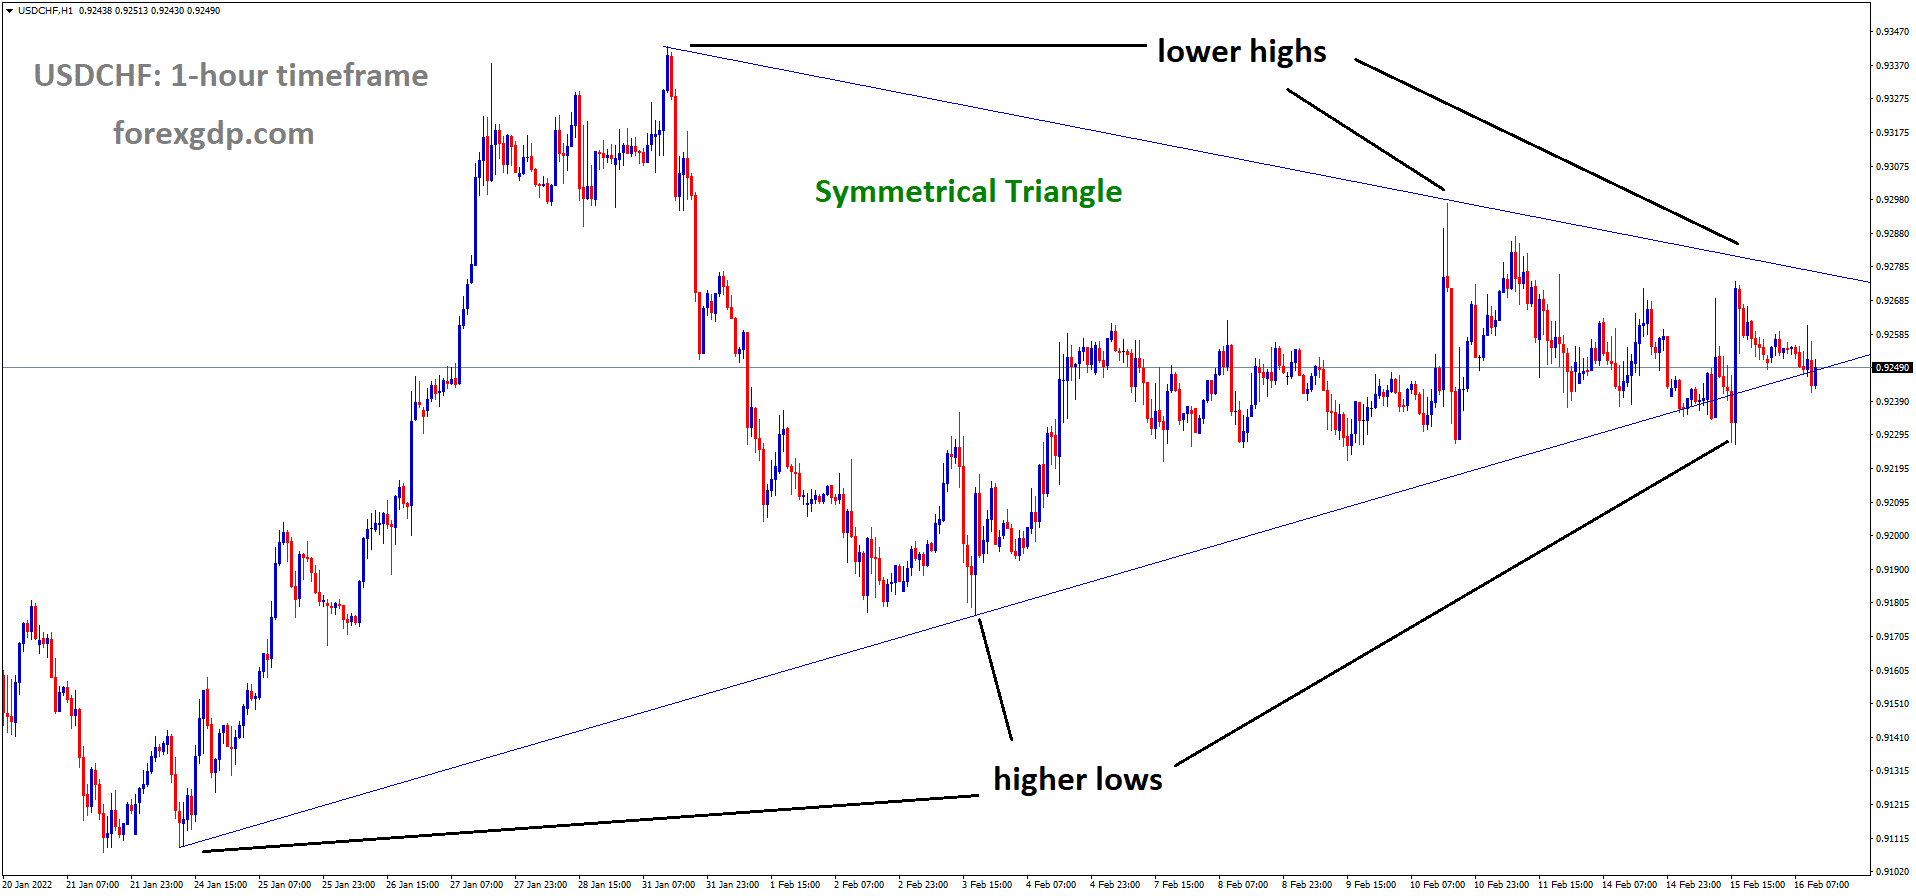 USDCHF is moving in the Symmetrical triangle pattern and the market has reached the bottom area of the pattern